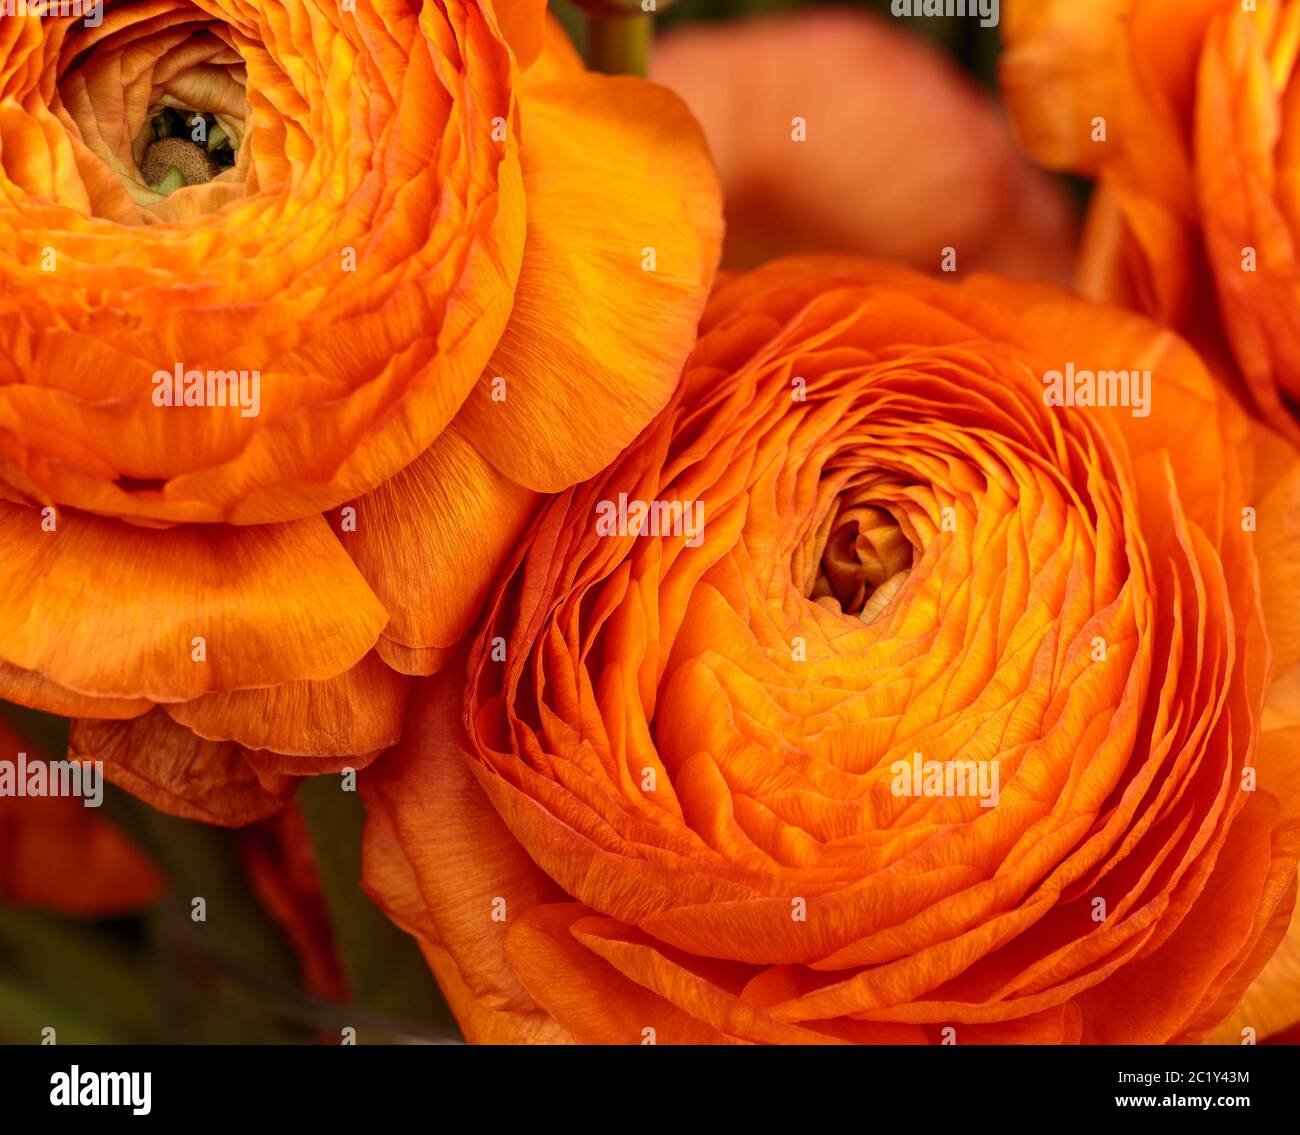 Beautiful orange herbaceous peony. Сlose up view of Ranunculus aka buttercup flower, exquisite, with a rose-like blossoms. Pers Stock Photo